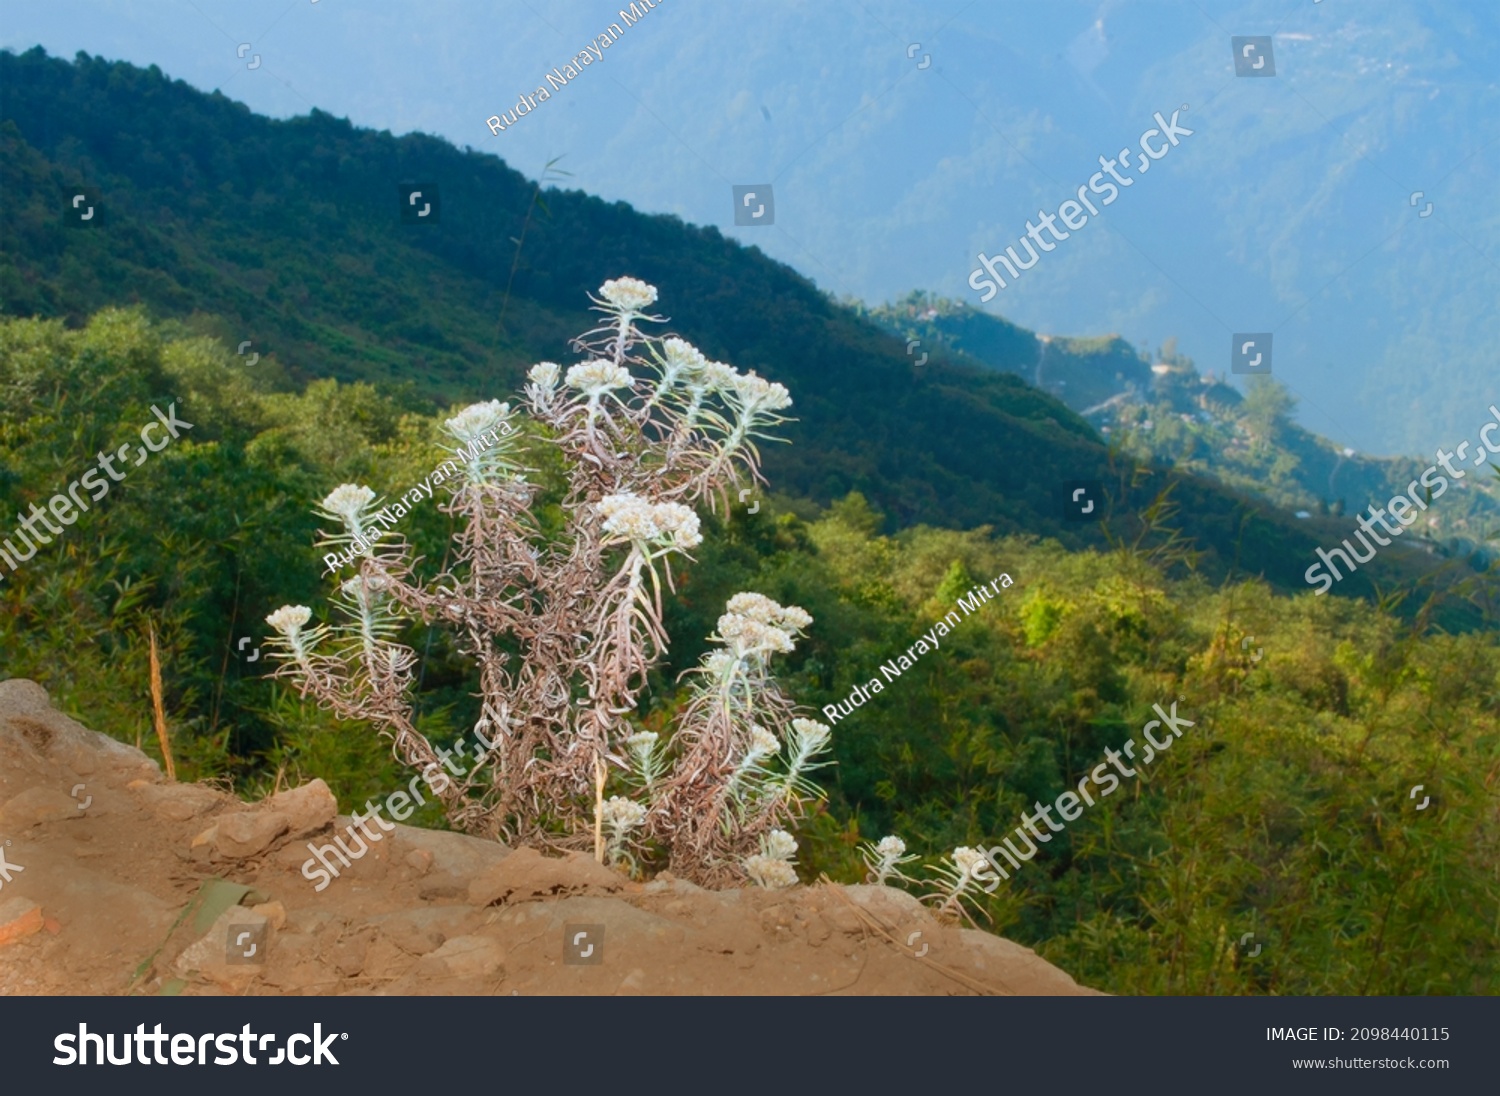 Play of light and shadow on Himalayan mountains, beautiful view of Silerygaon Village at Sikkim, India. Wild flowers in foreground. #2098440115